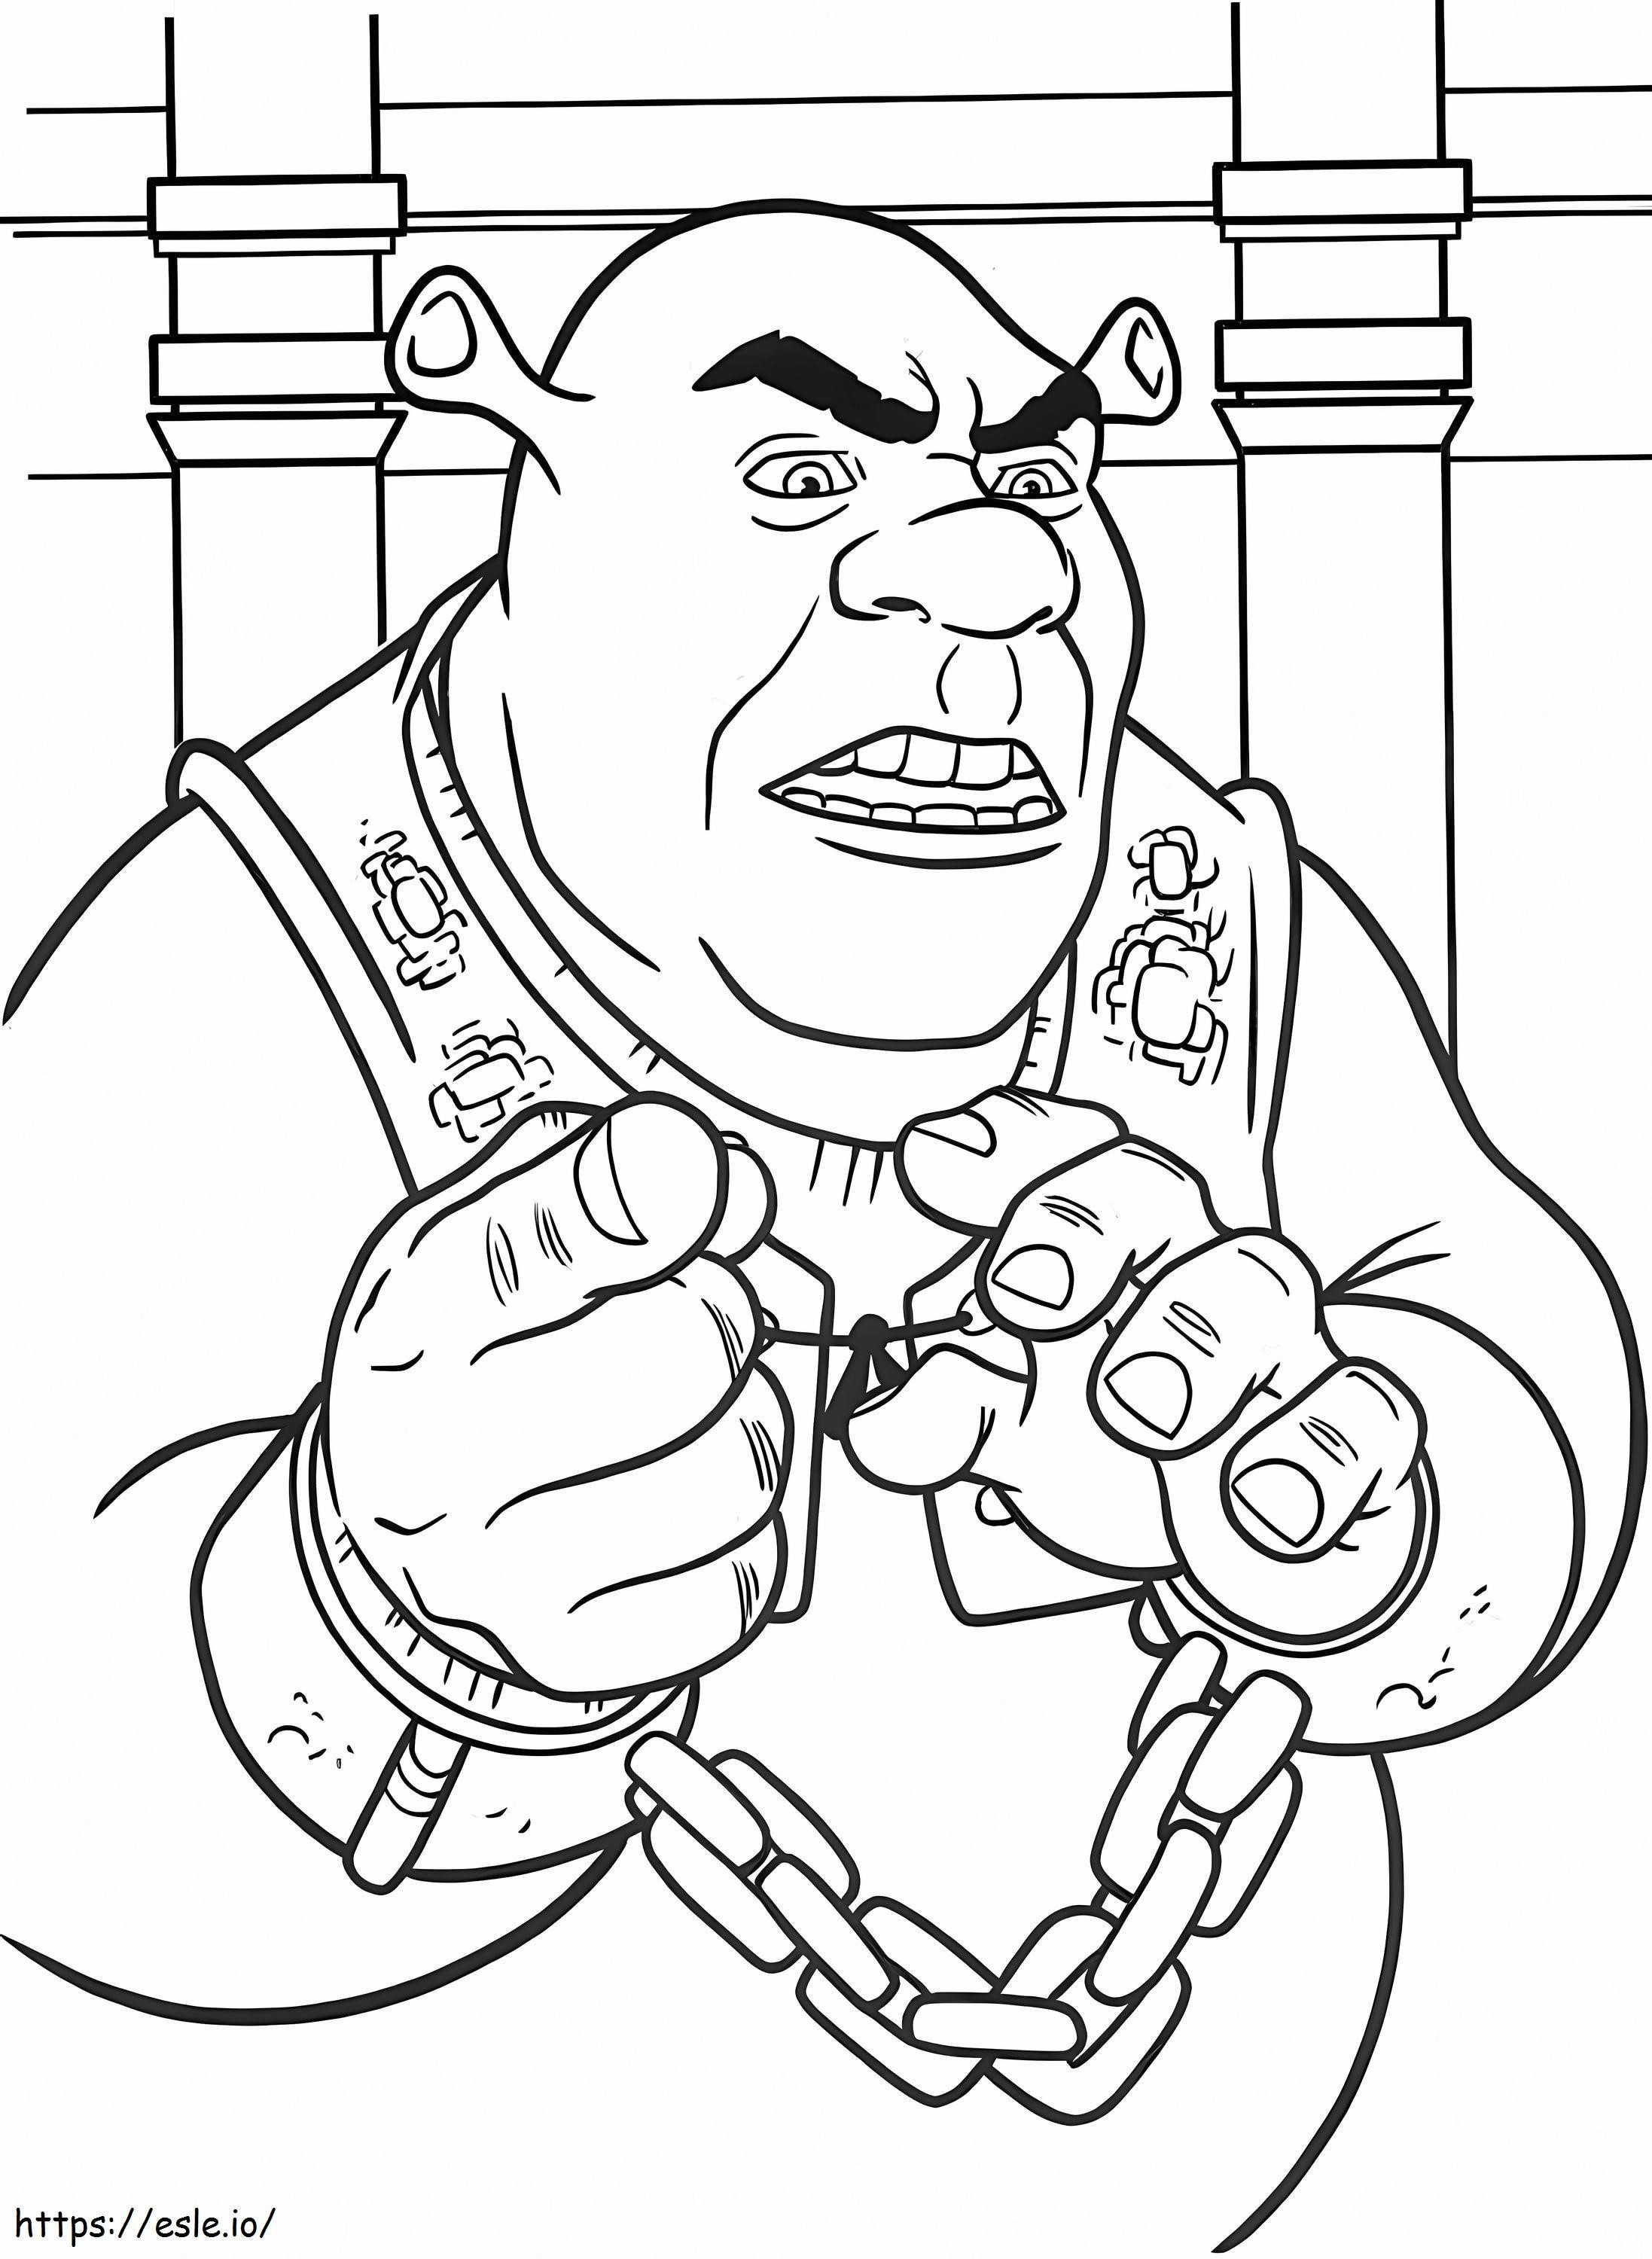 Angry Shrek A4 coloring page